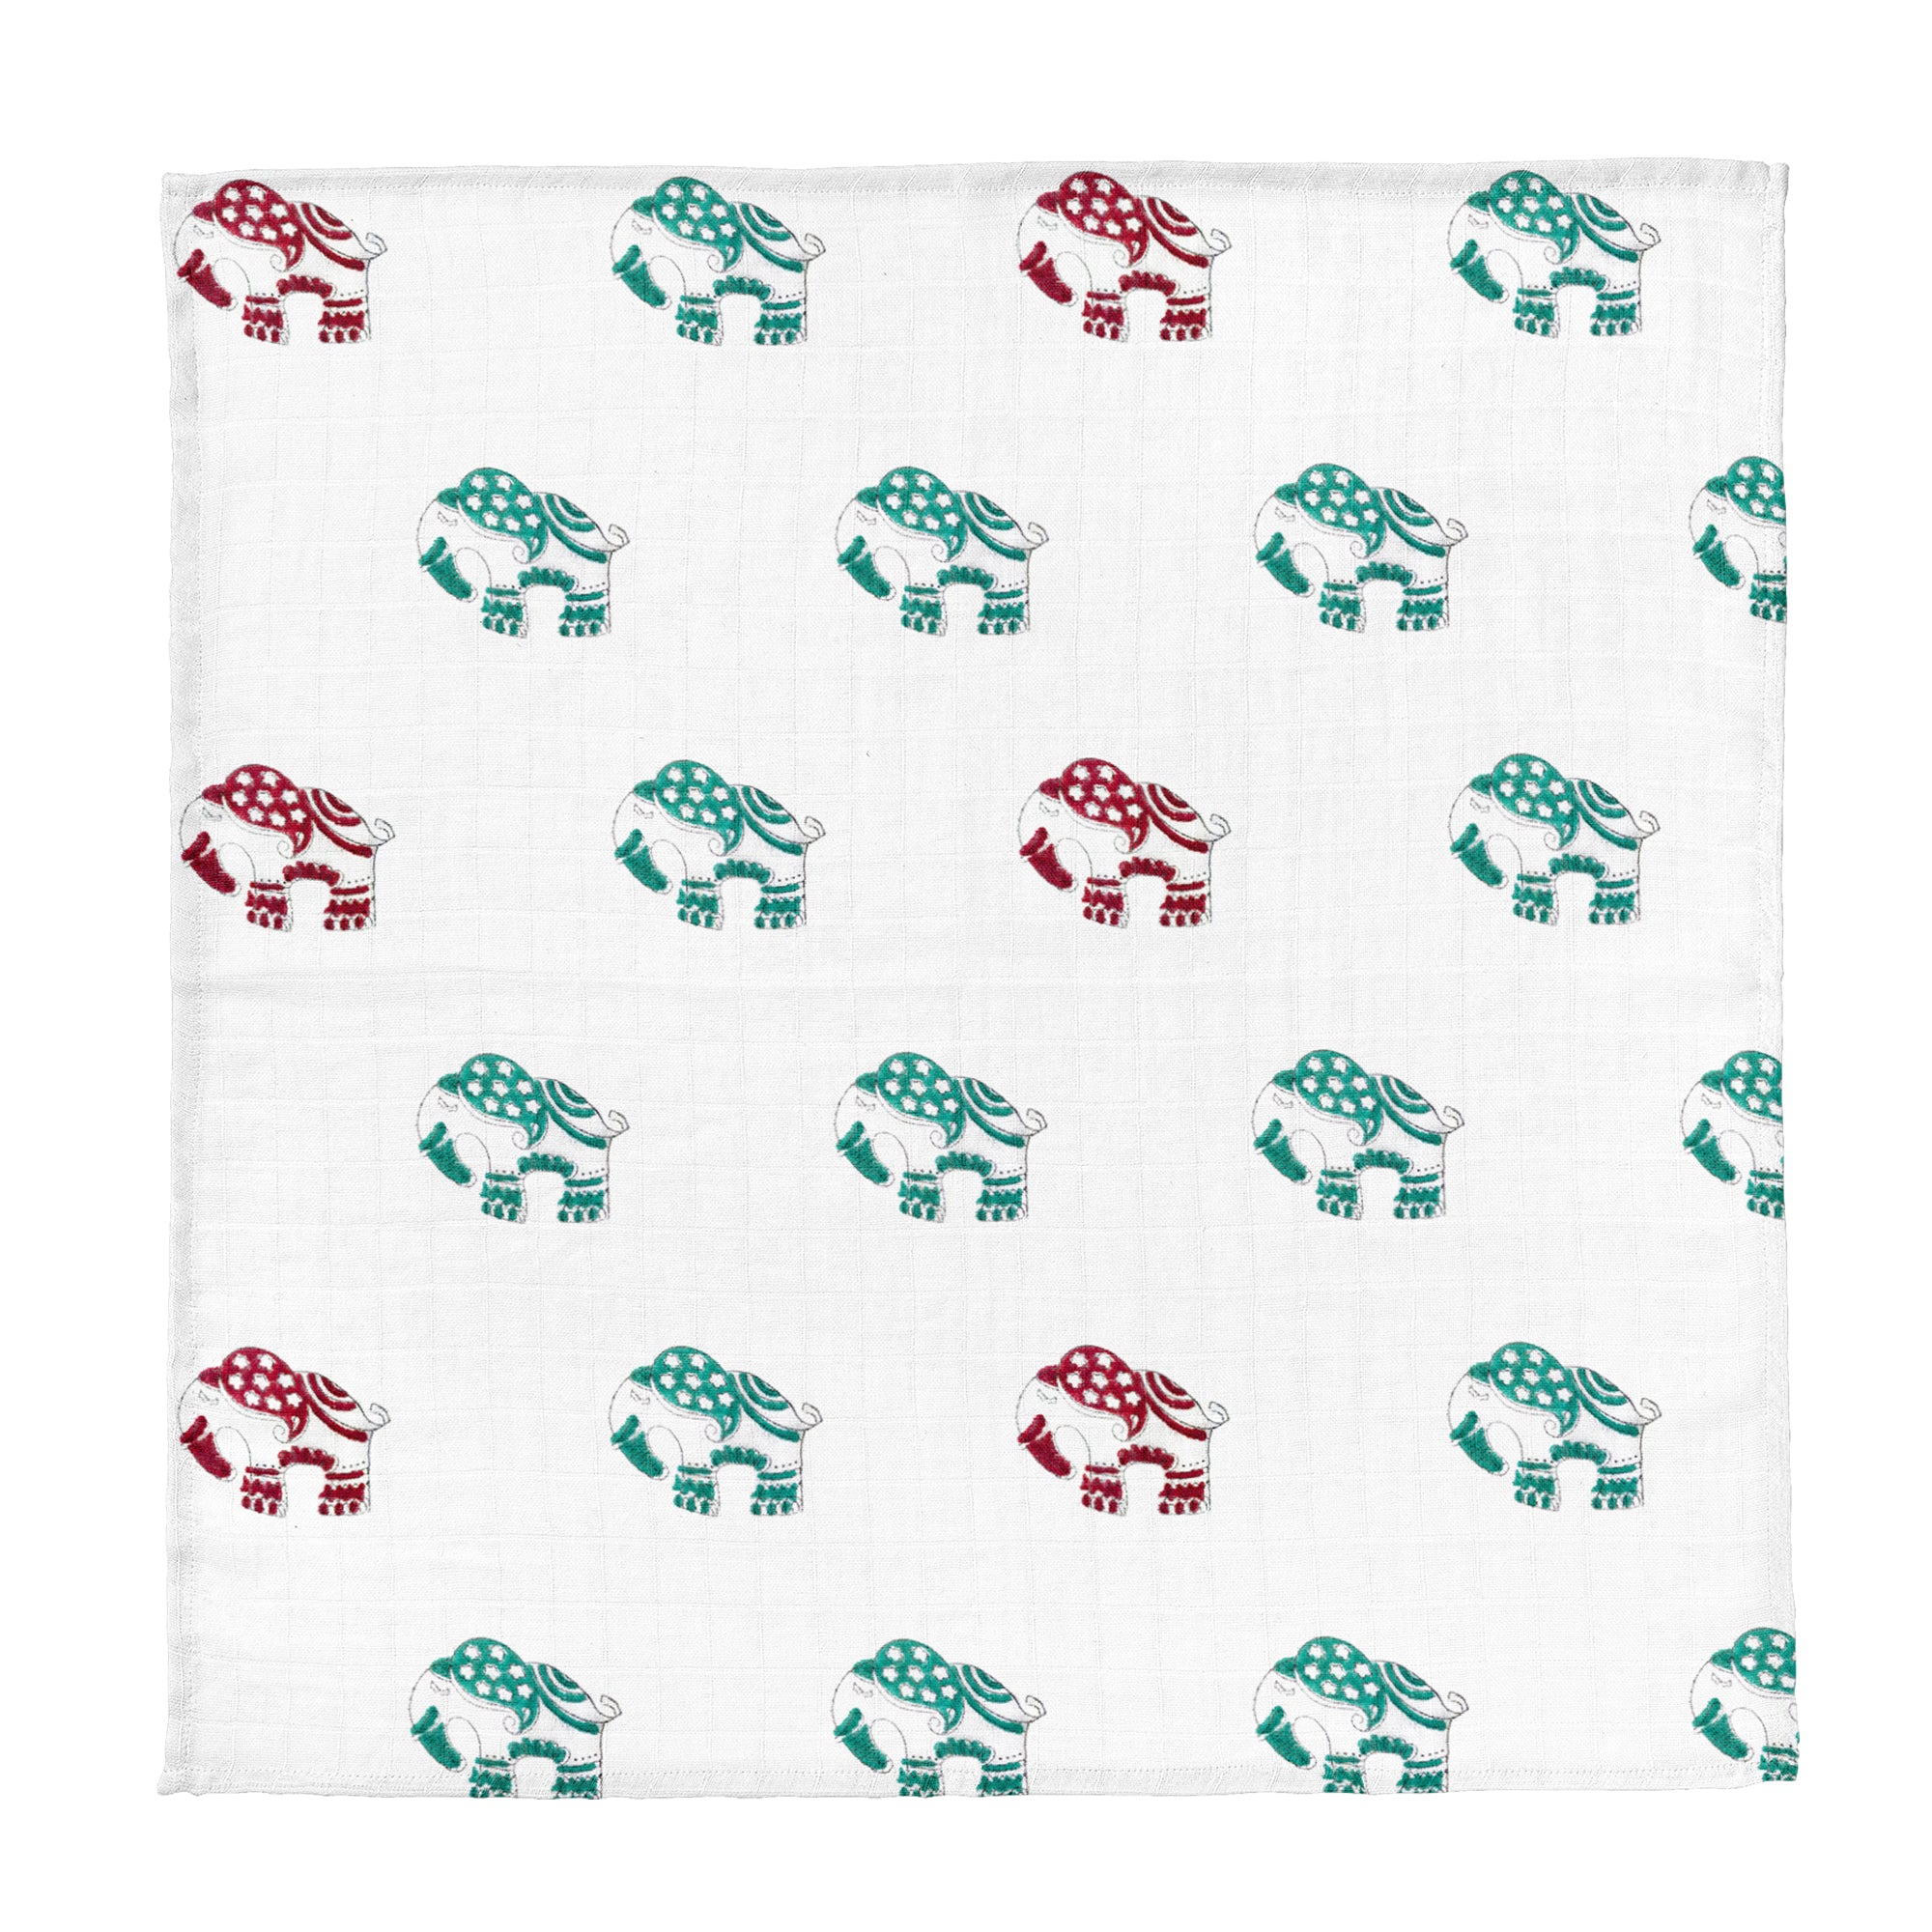 Mom's Home Organic Cotton Baby Muslin Swaddle, African Elephant - Large Size, 120X120 cm (Multicolor)